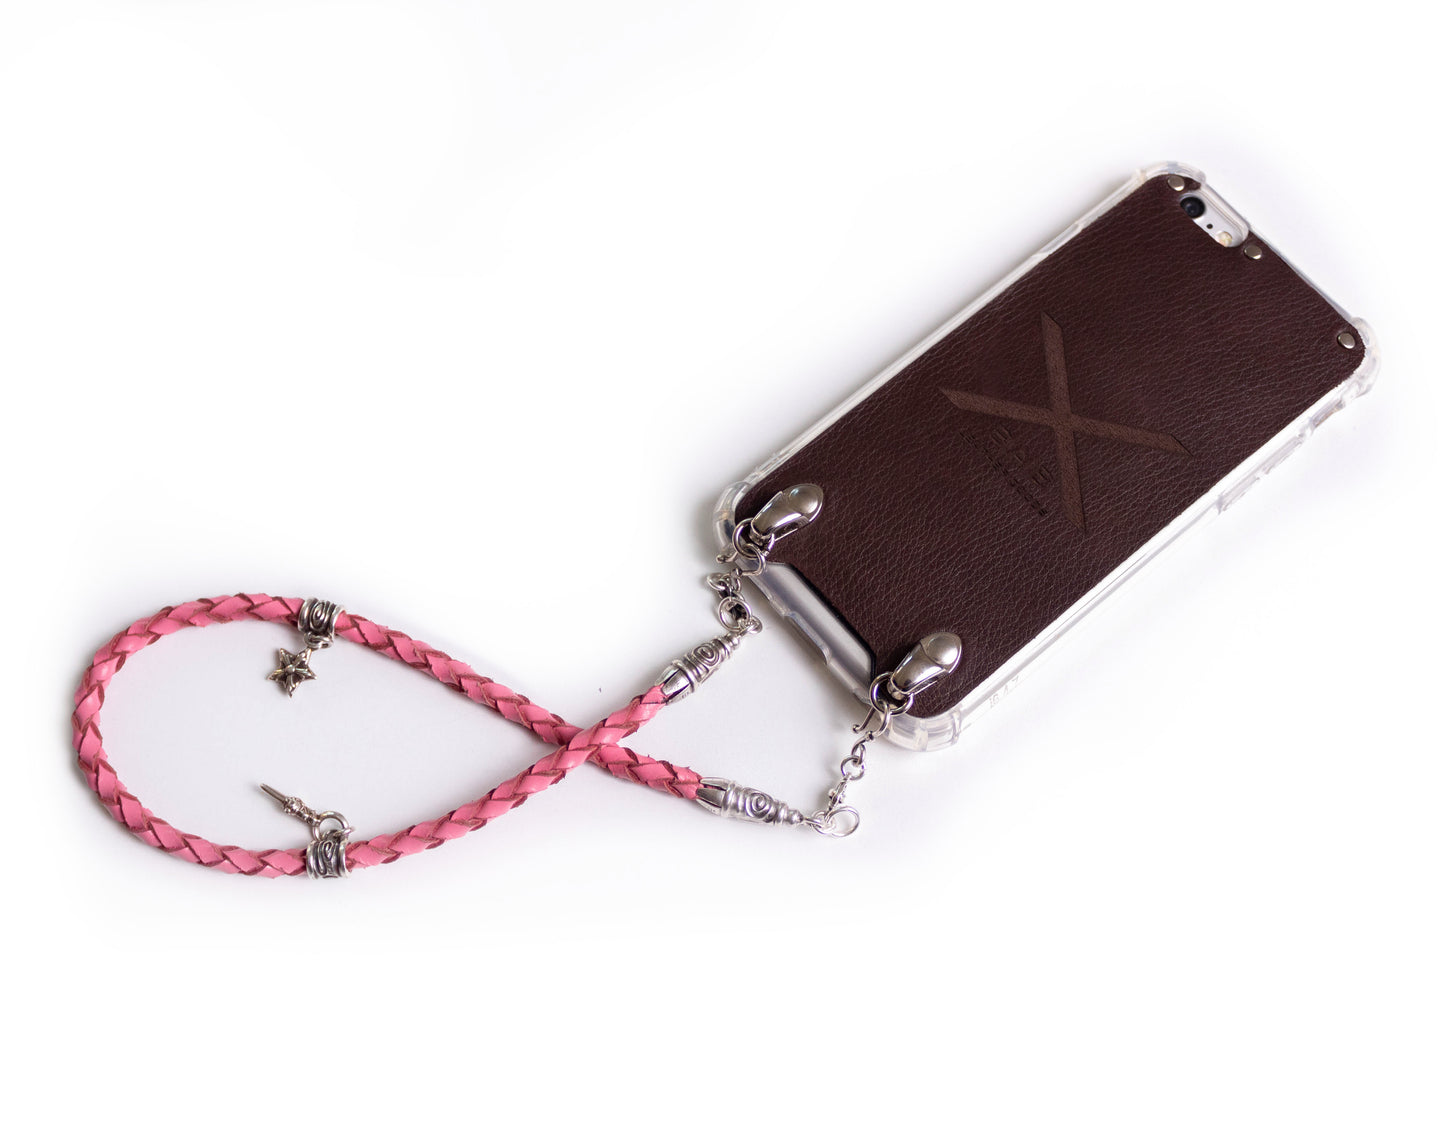 Full-Grain Genuine vegetable-tanned Leather & 925 Sterling Silver Case for iPhone. Pink Genuine Leather Bracelet/Choker/Strap 4 hand-braided strands.- F02